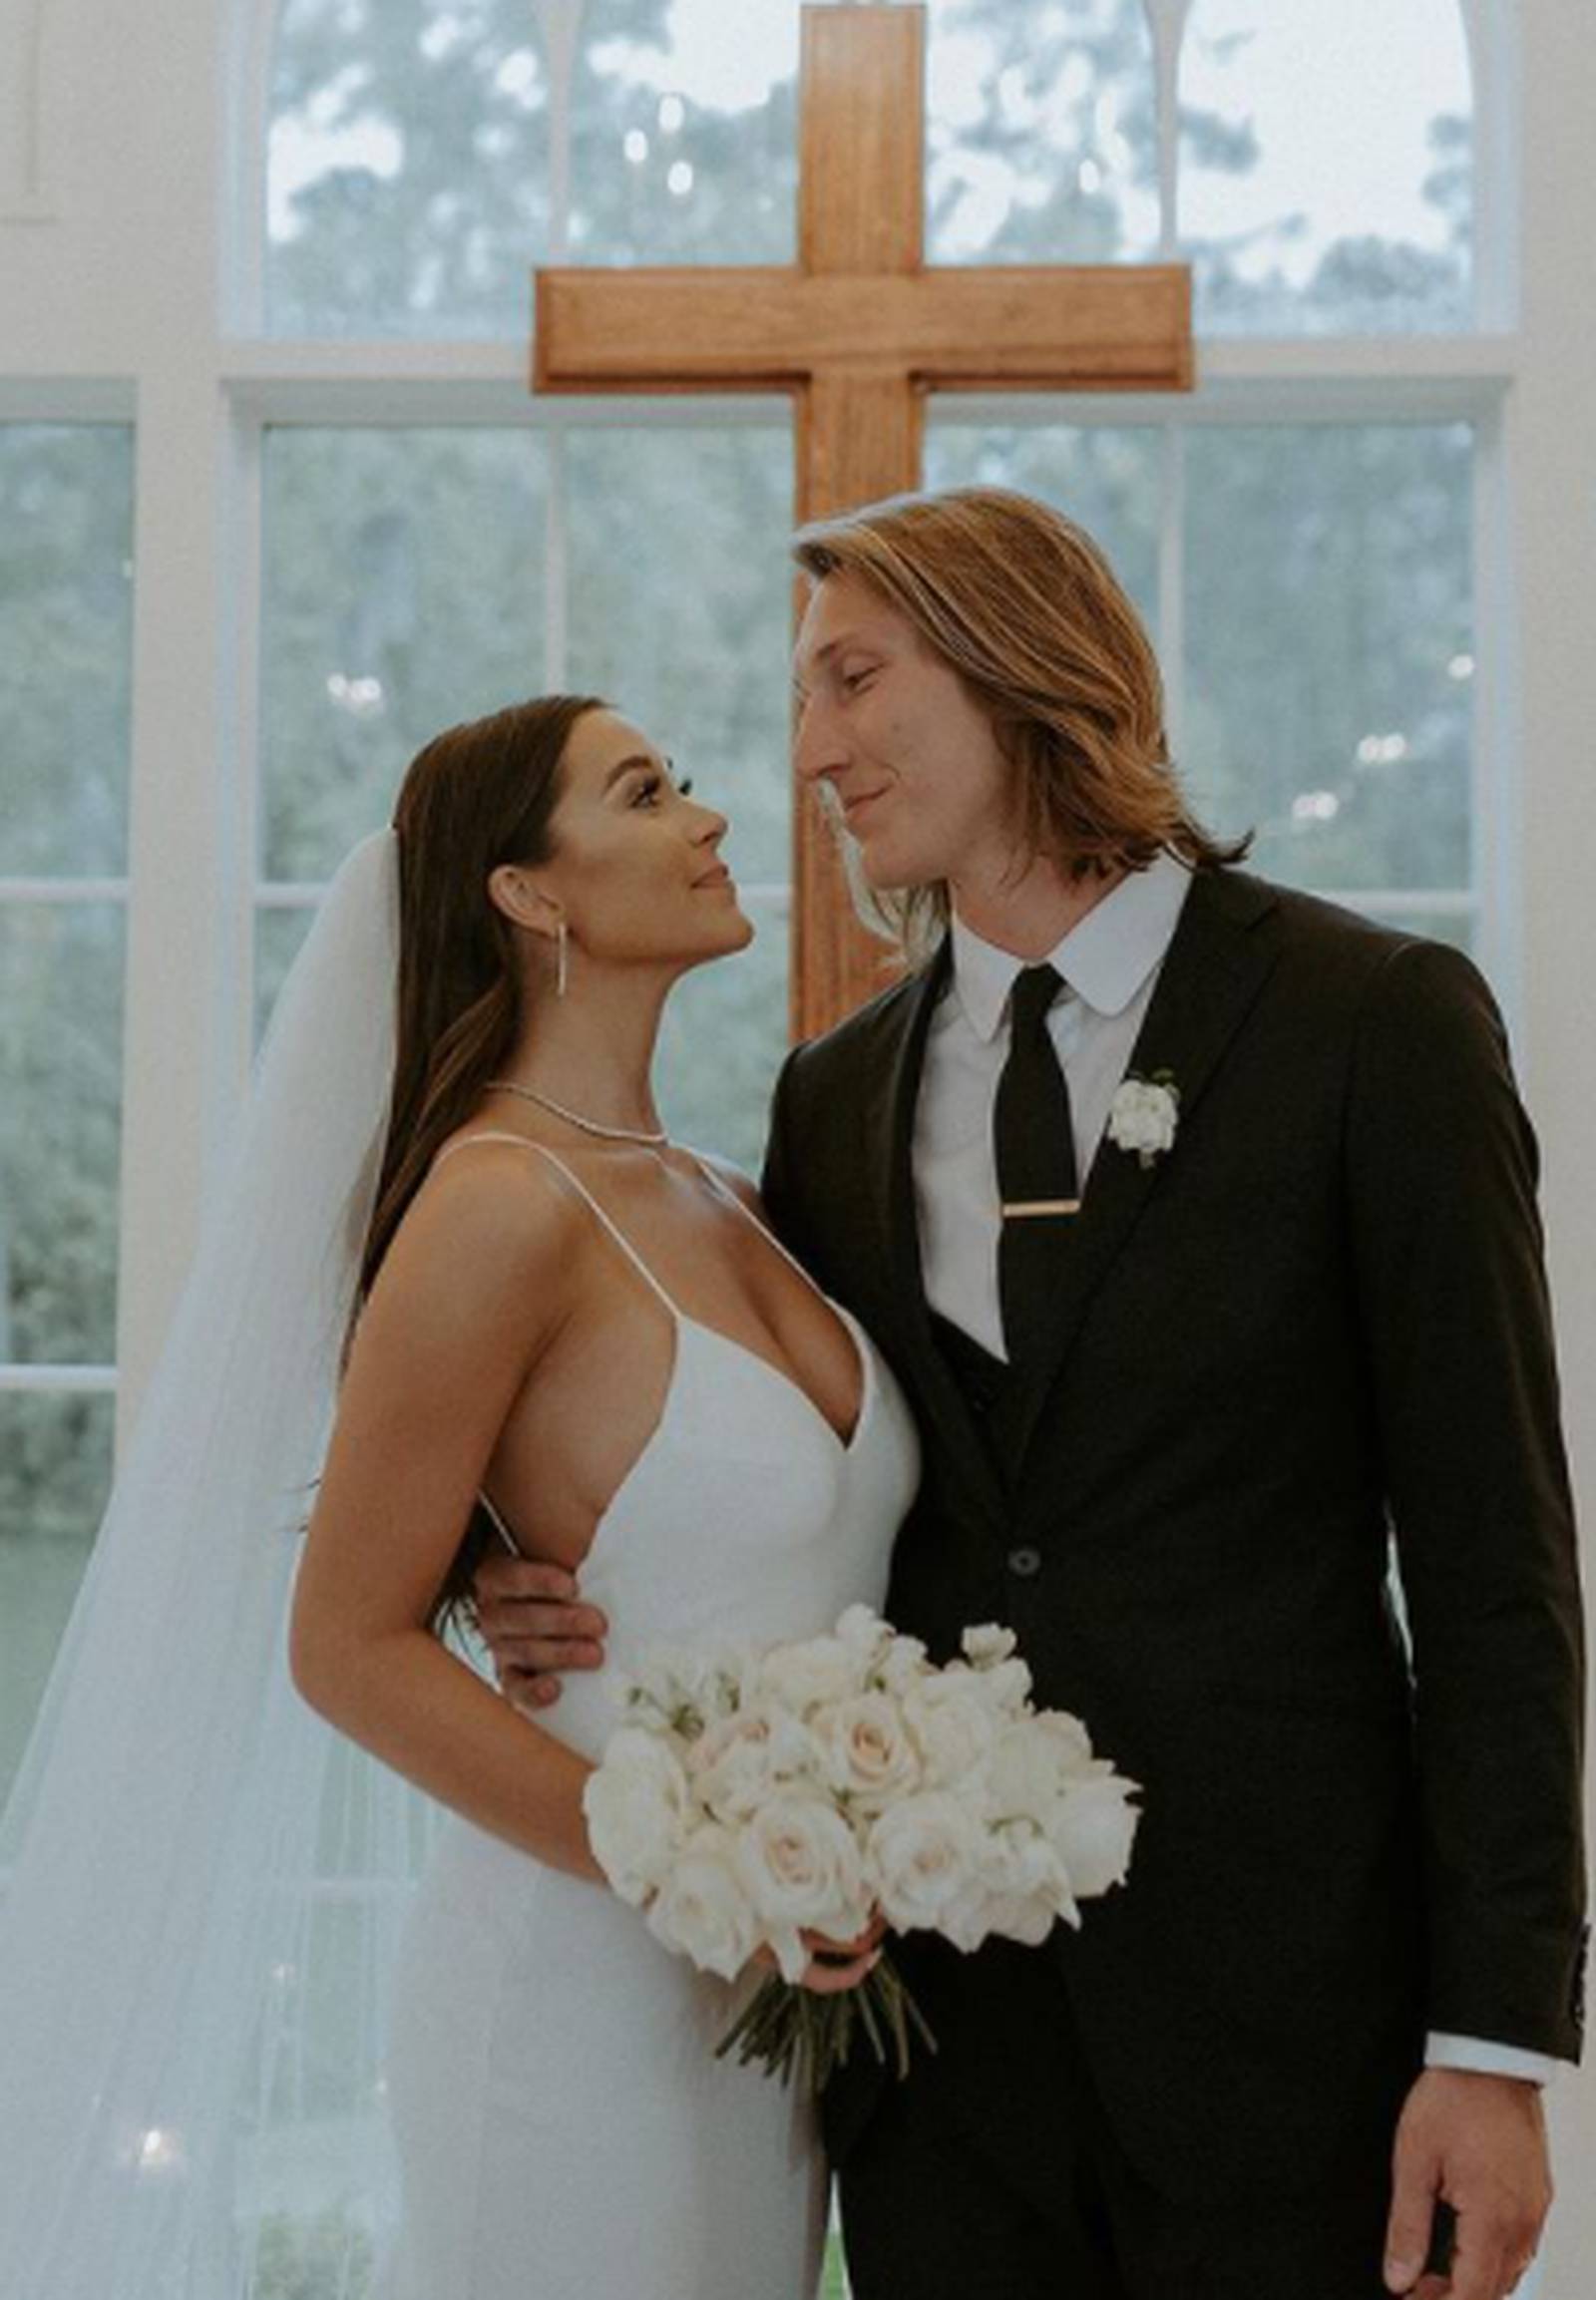 Photos Trevor Lawrence And Marissa Mowry Tie The Knot 969 The Eagle